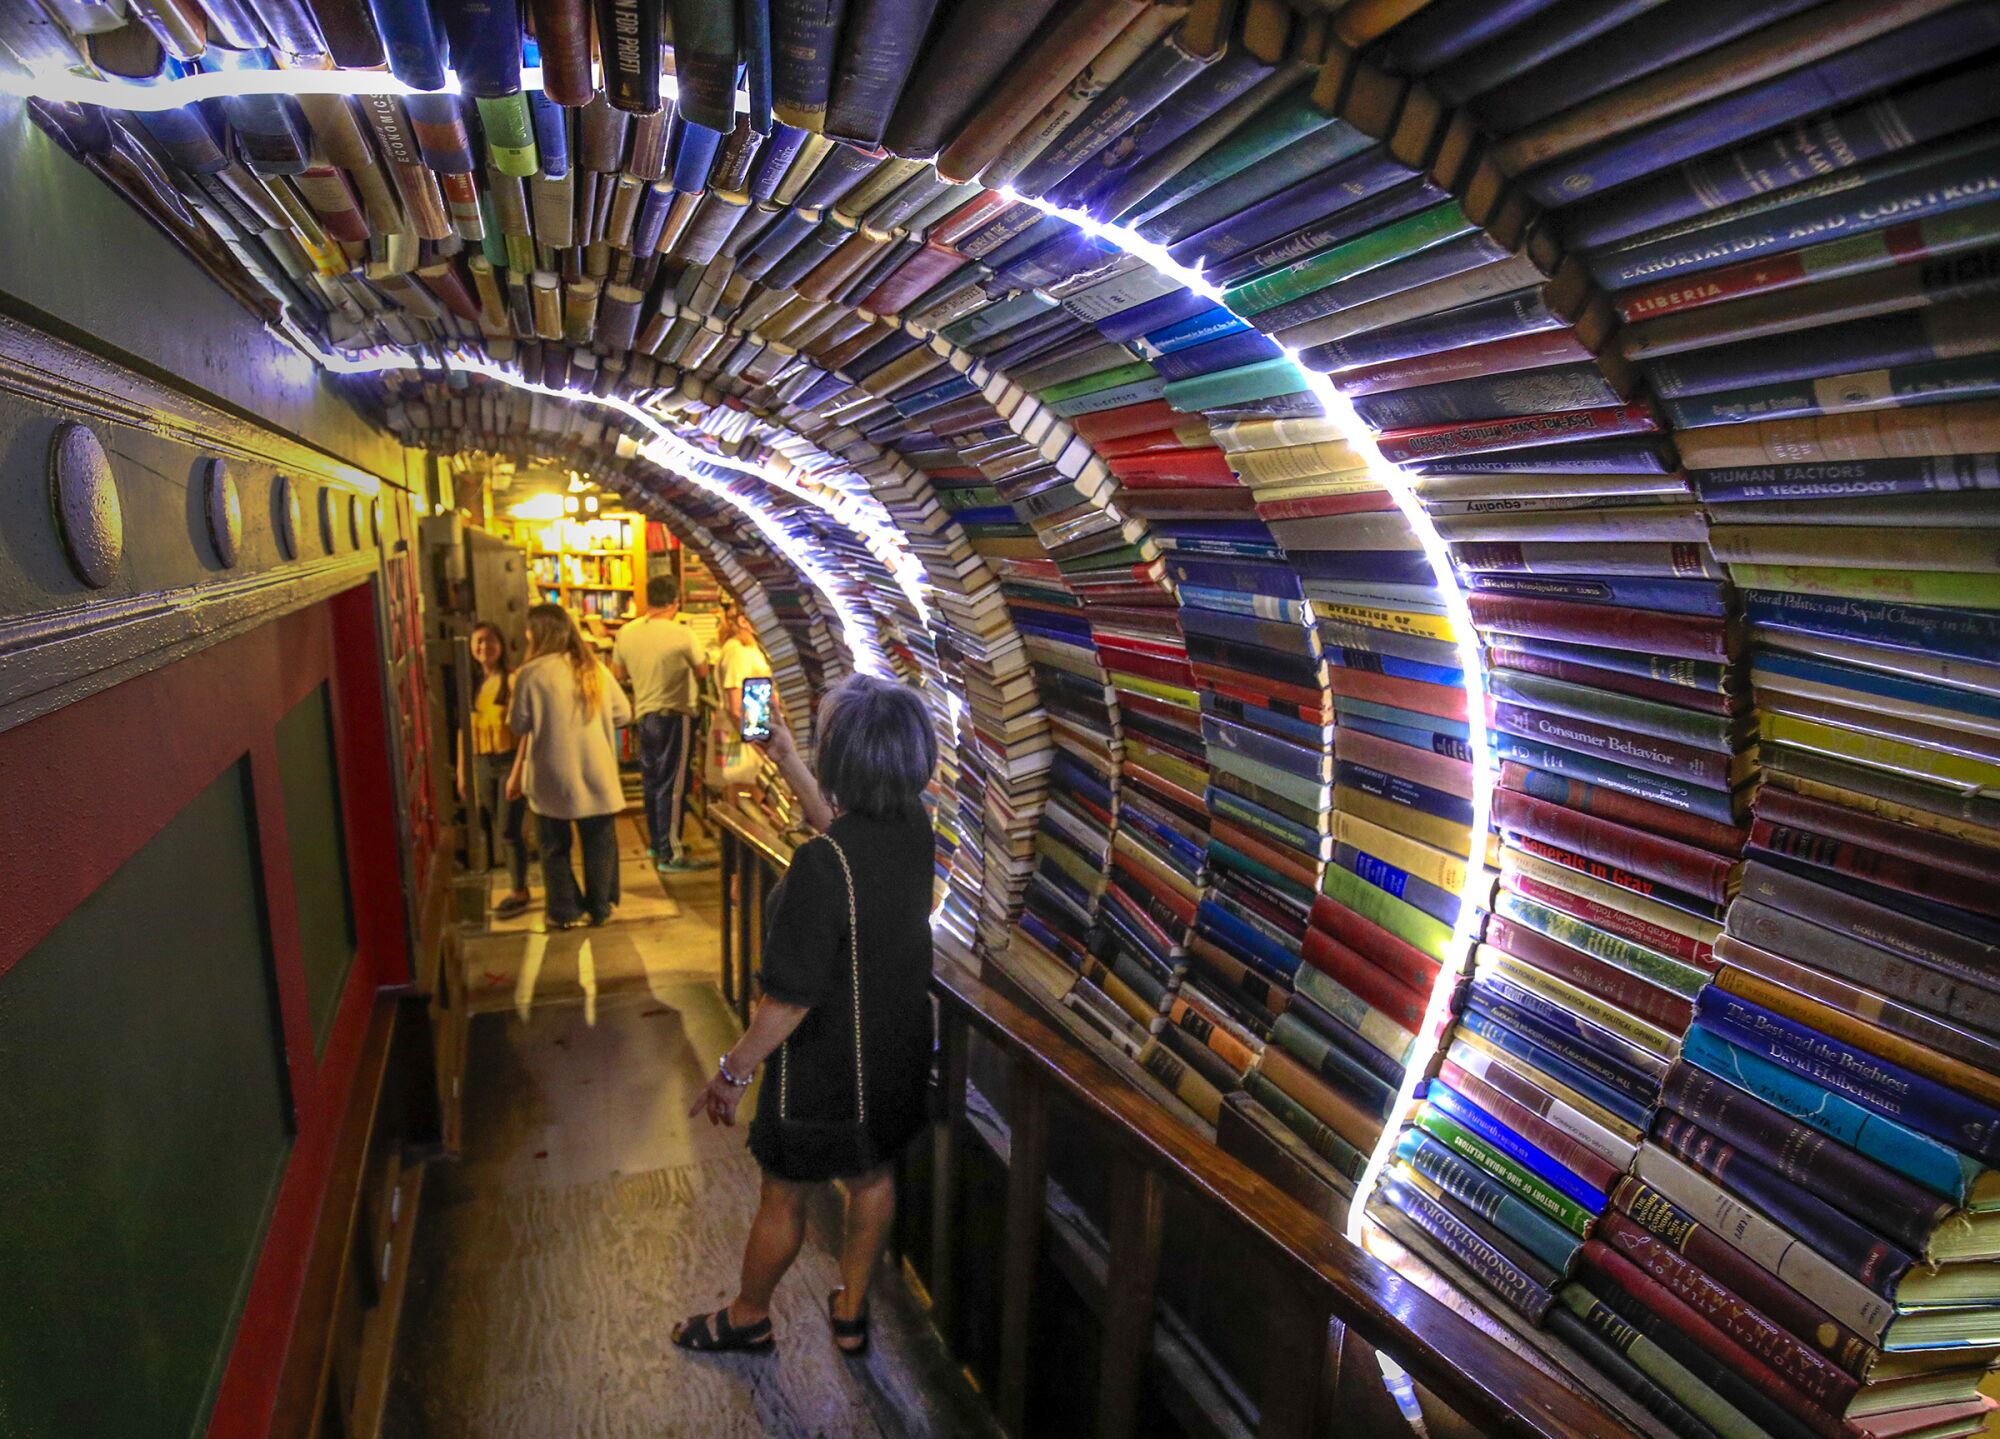 The book tunnel and labyrinth area on the second floor at the Last Bookstore 